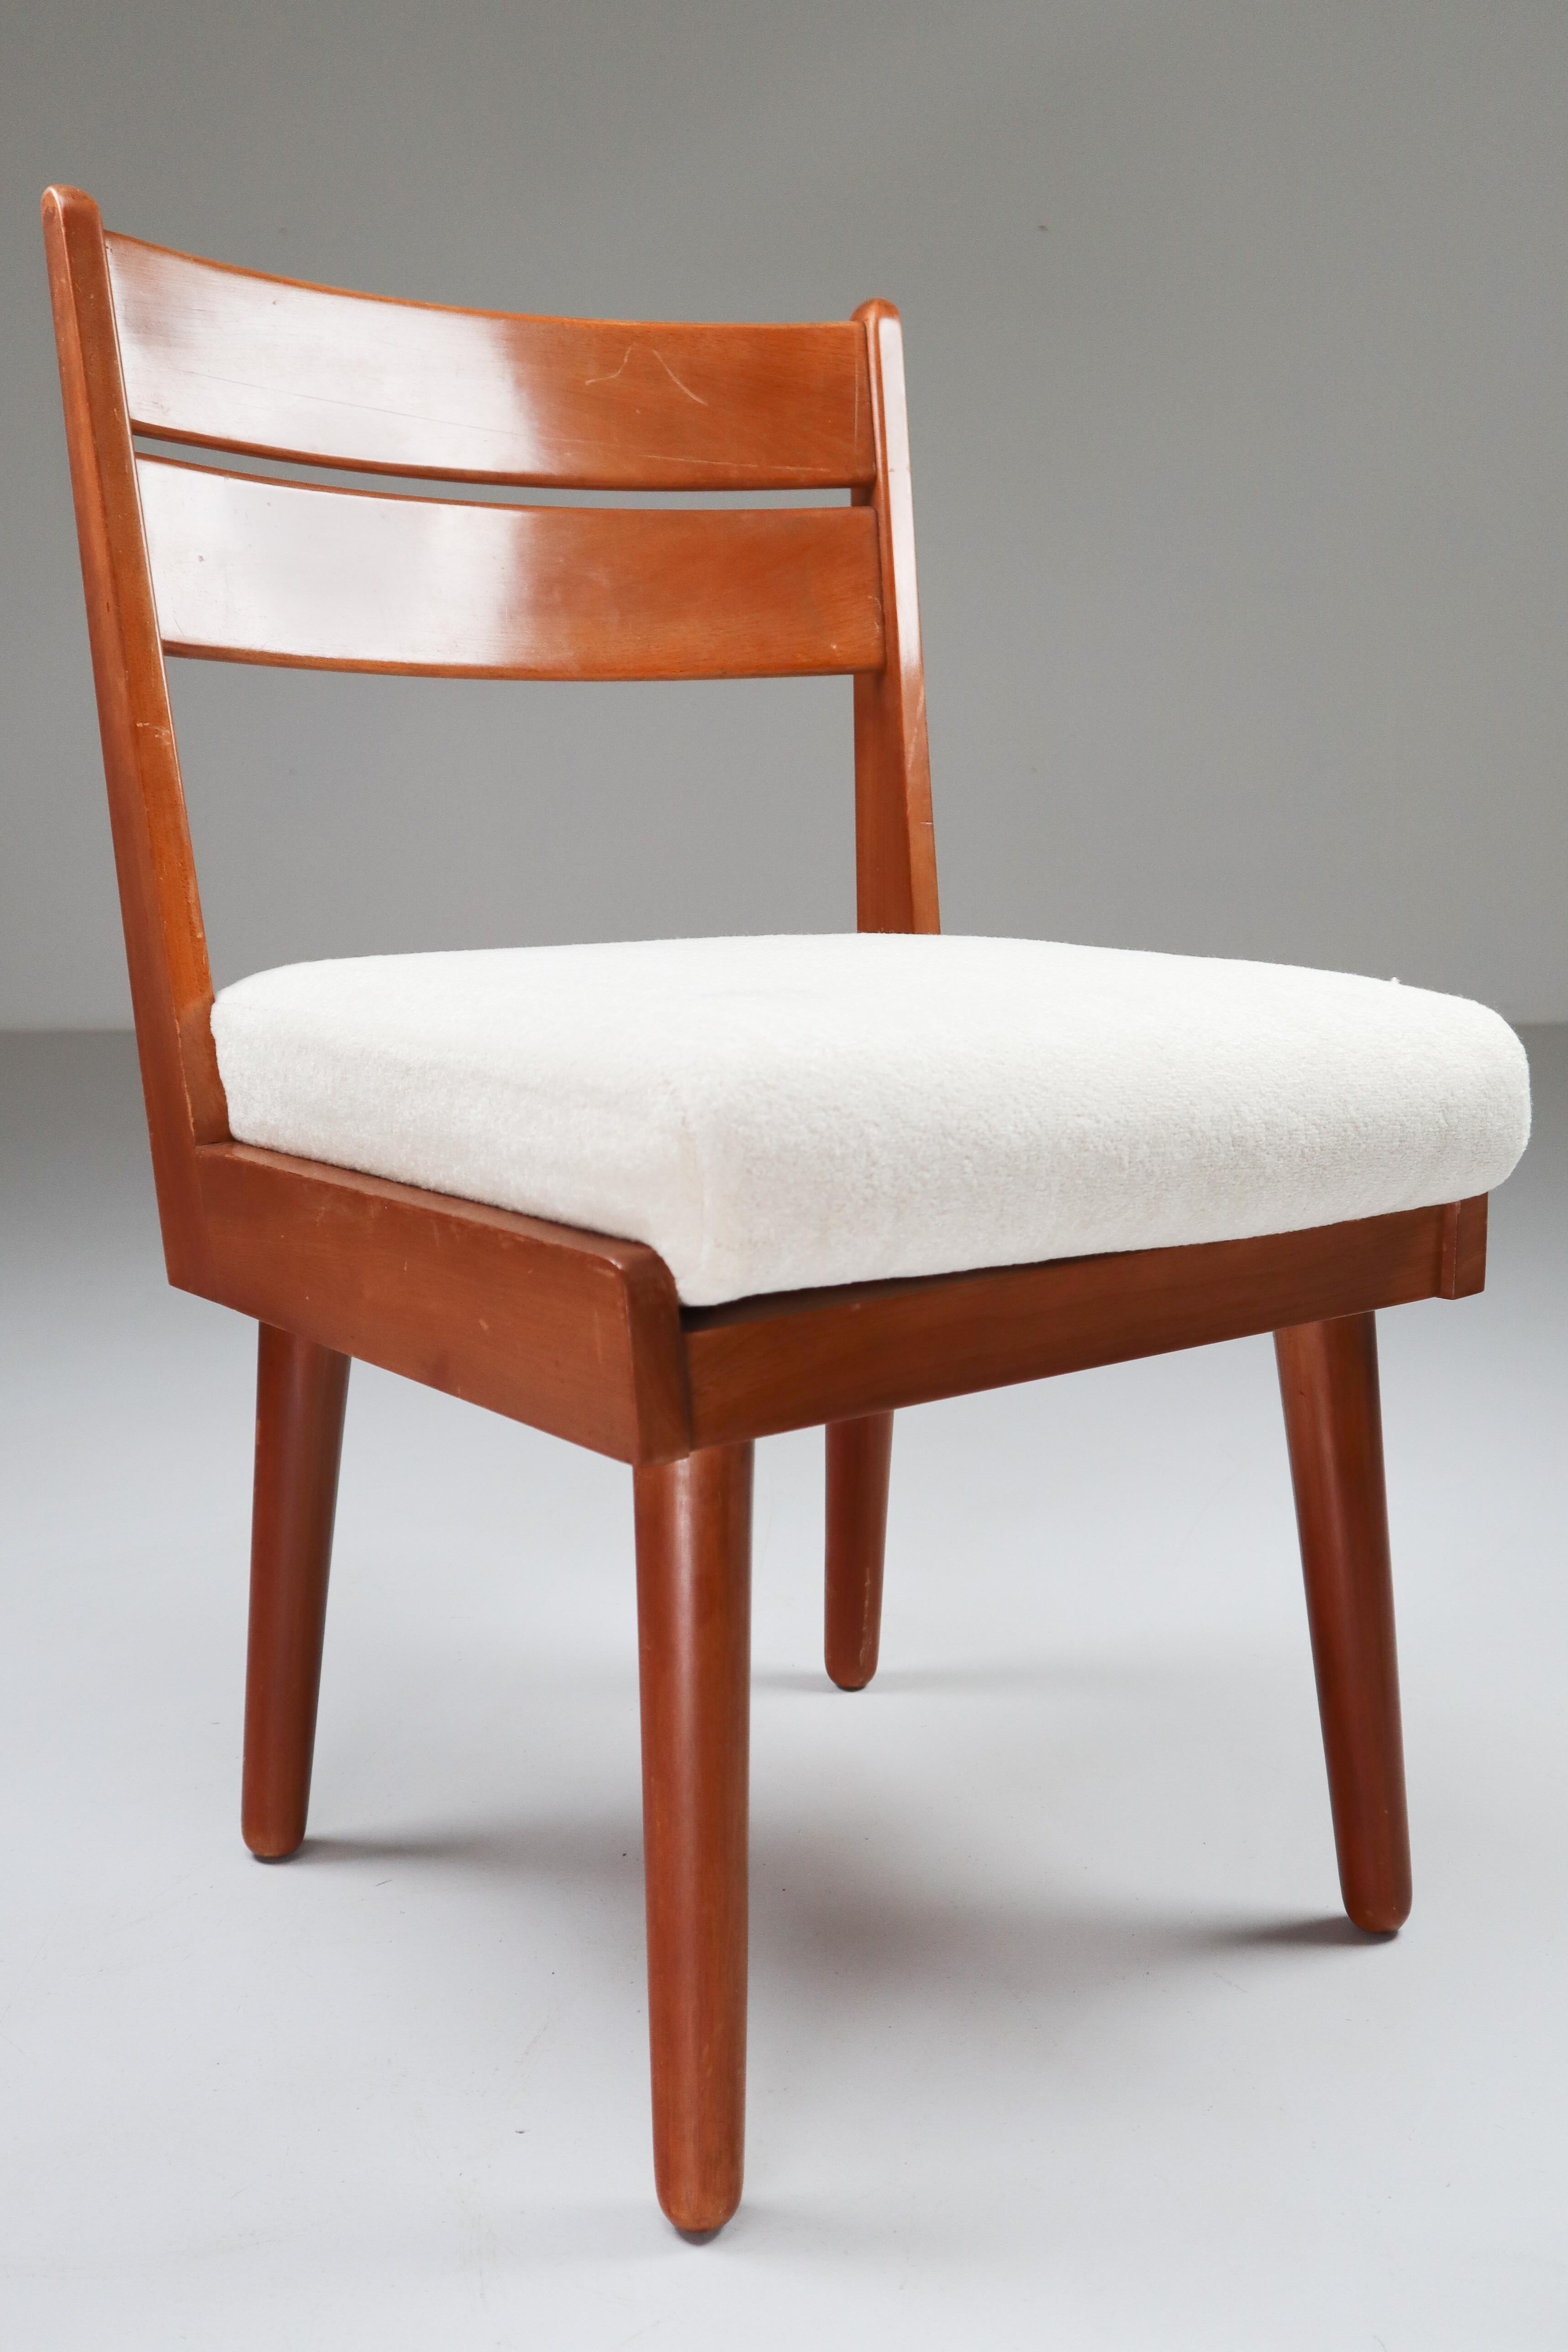 Mid-Century Modern Midcentury French Chair in Walnut and Wool Fabric, 1950s